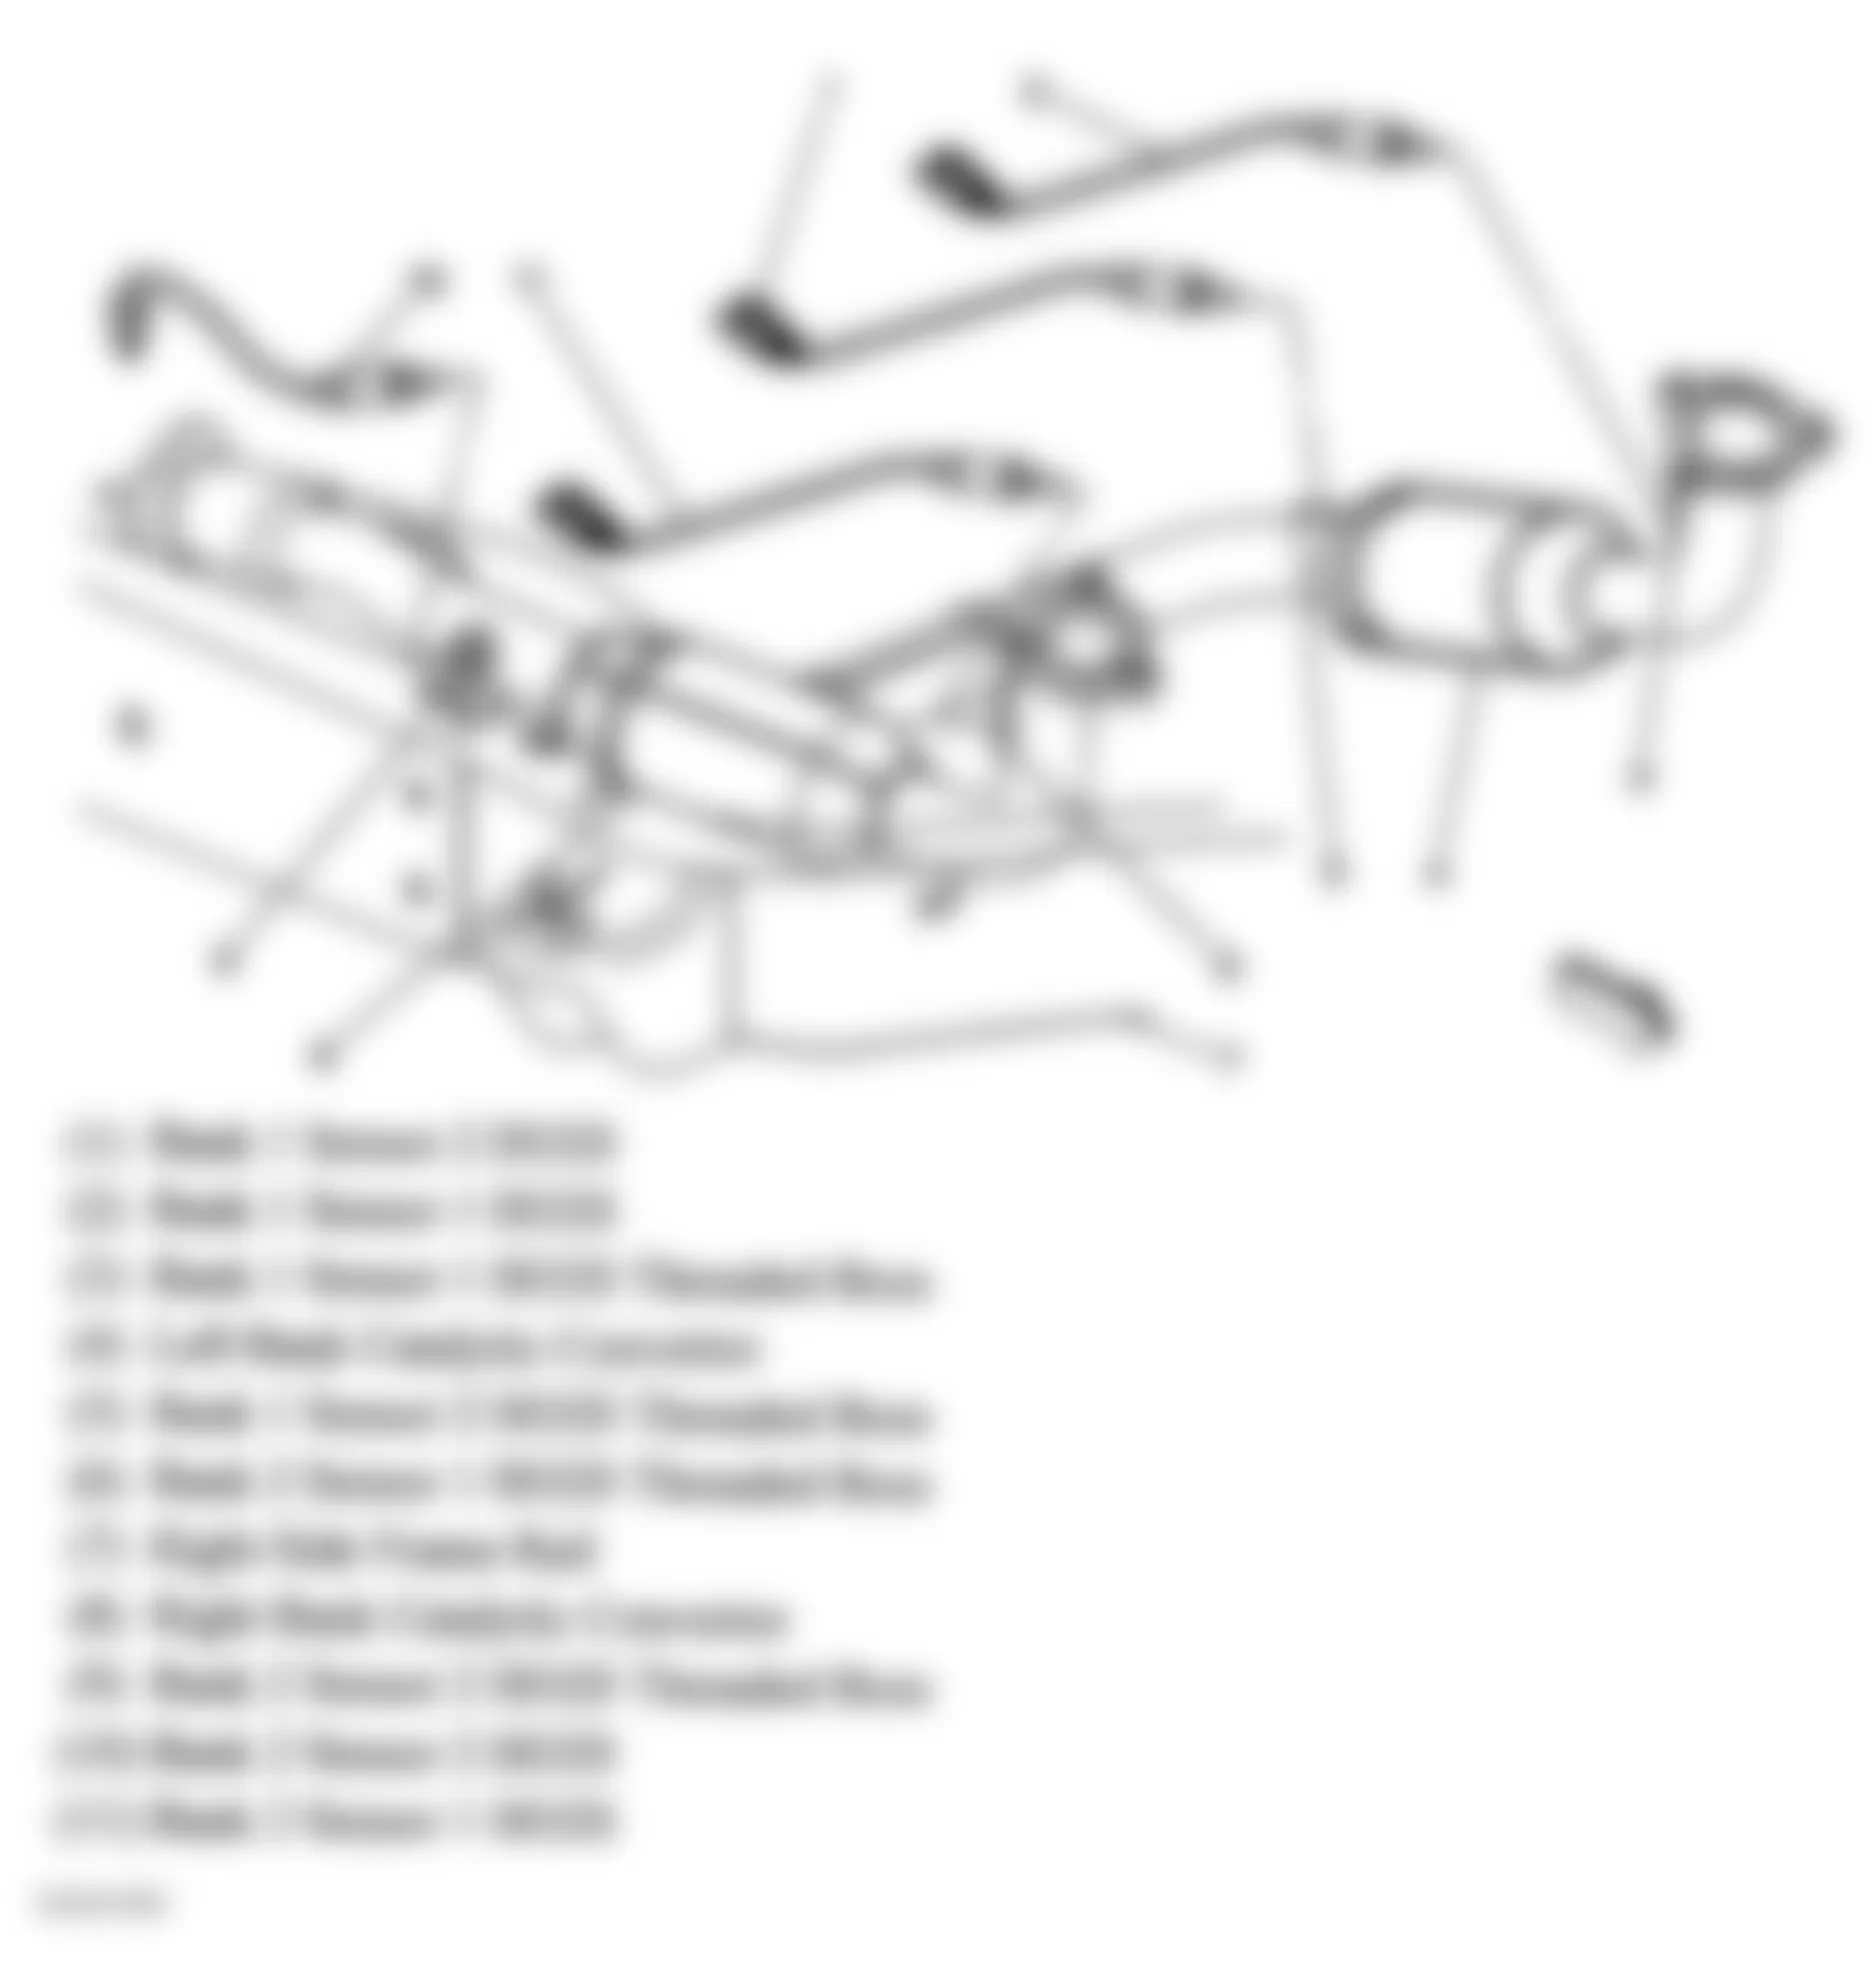 Chevrolet Avalanche 1500 2006 - Component Locations -  Exhaust System (4.8L & 5.3L)